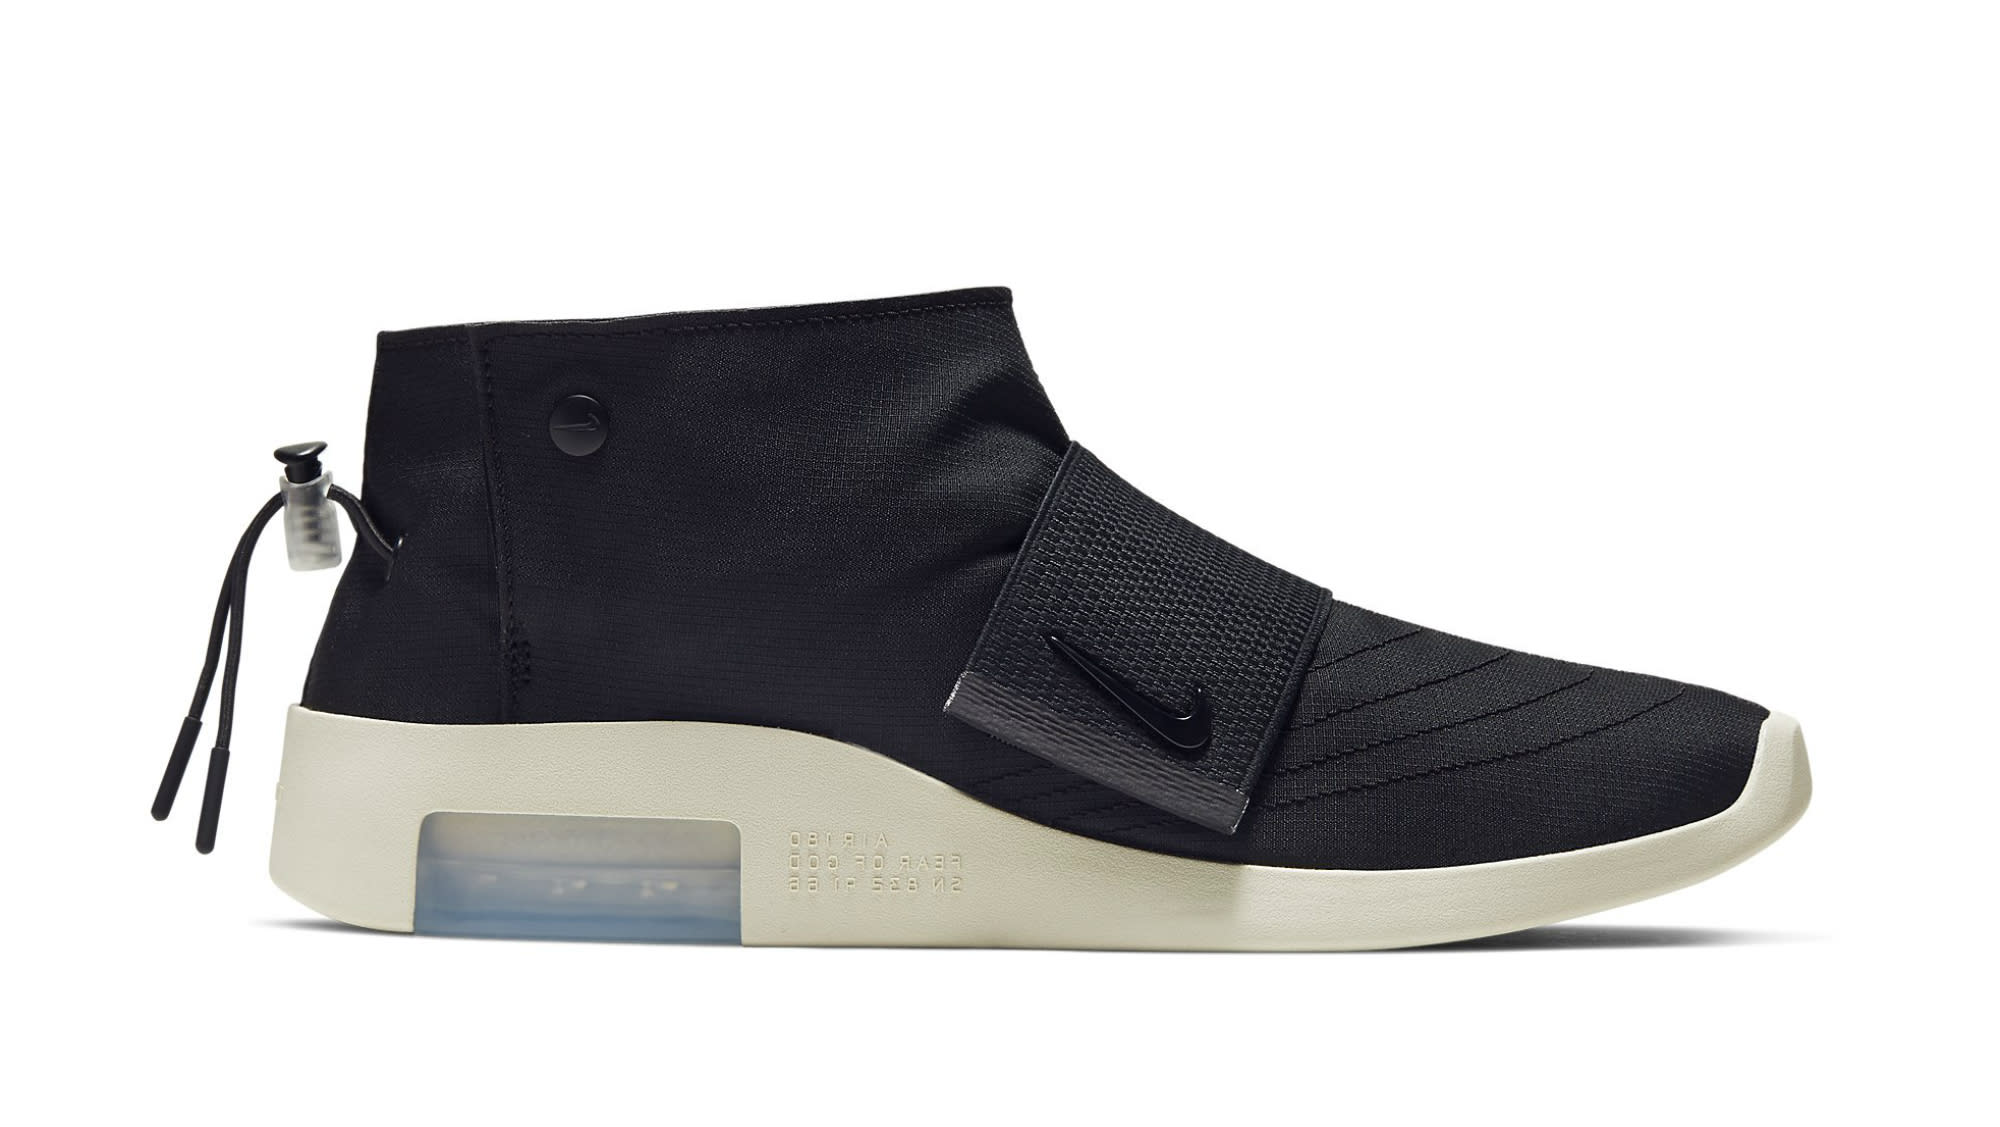 nike-air-fear-of-god-moccasin-black-at8086-002-release-date